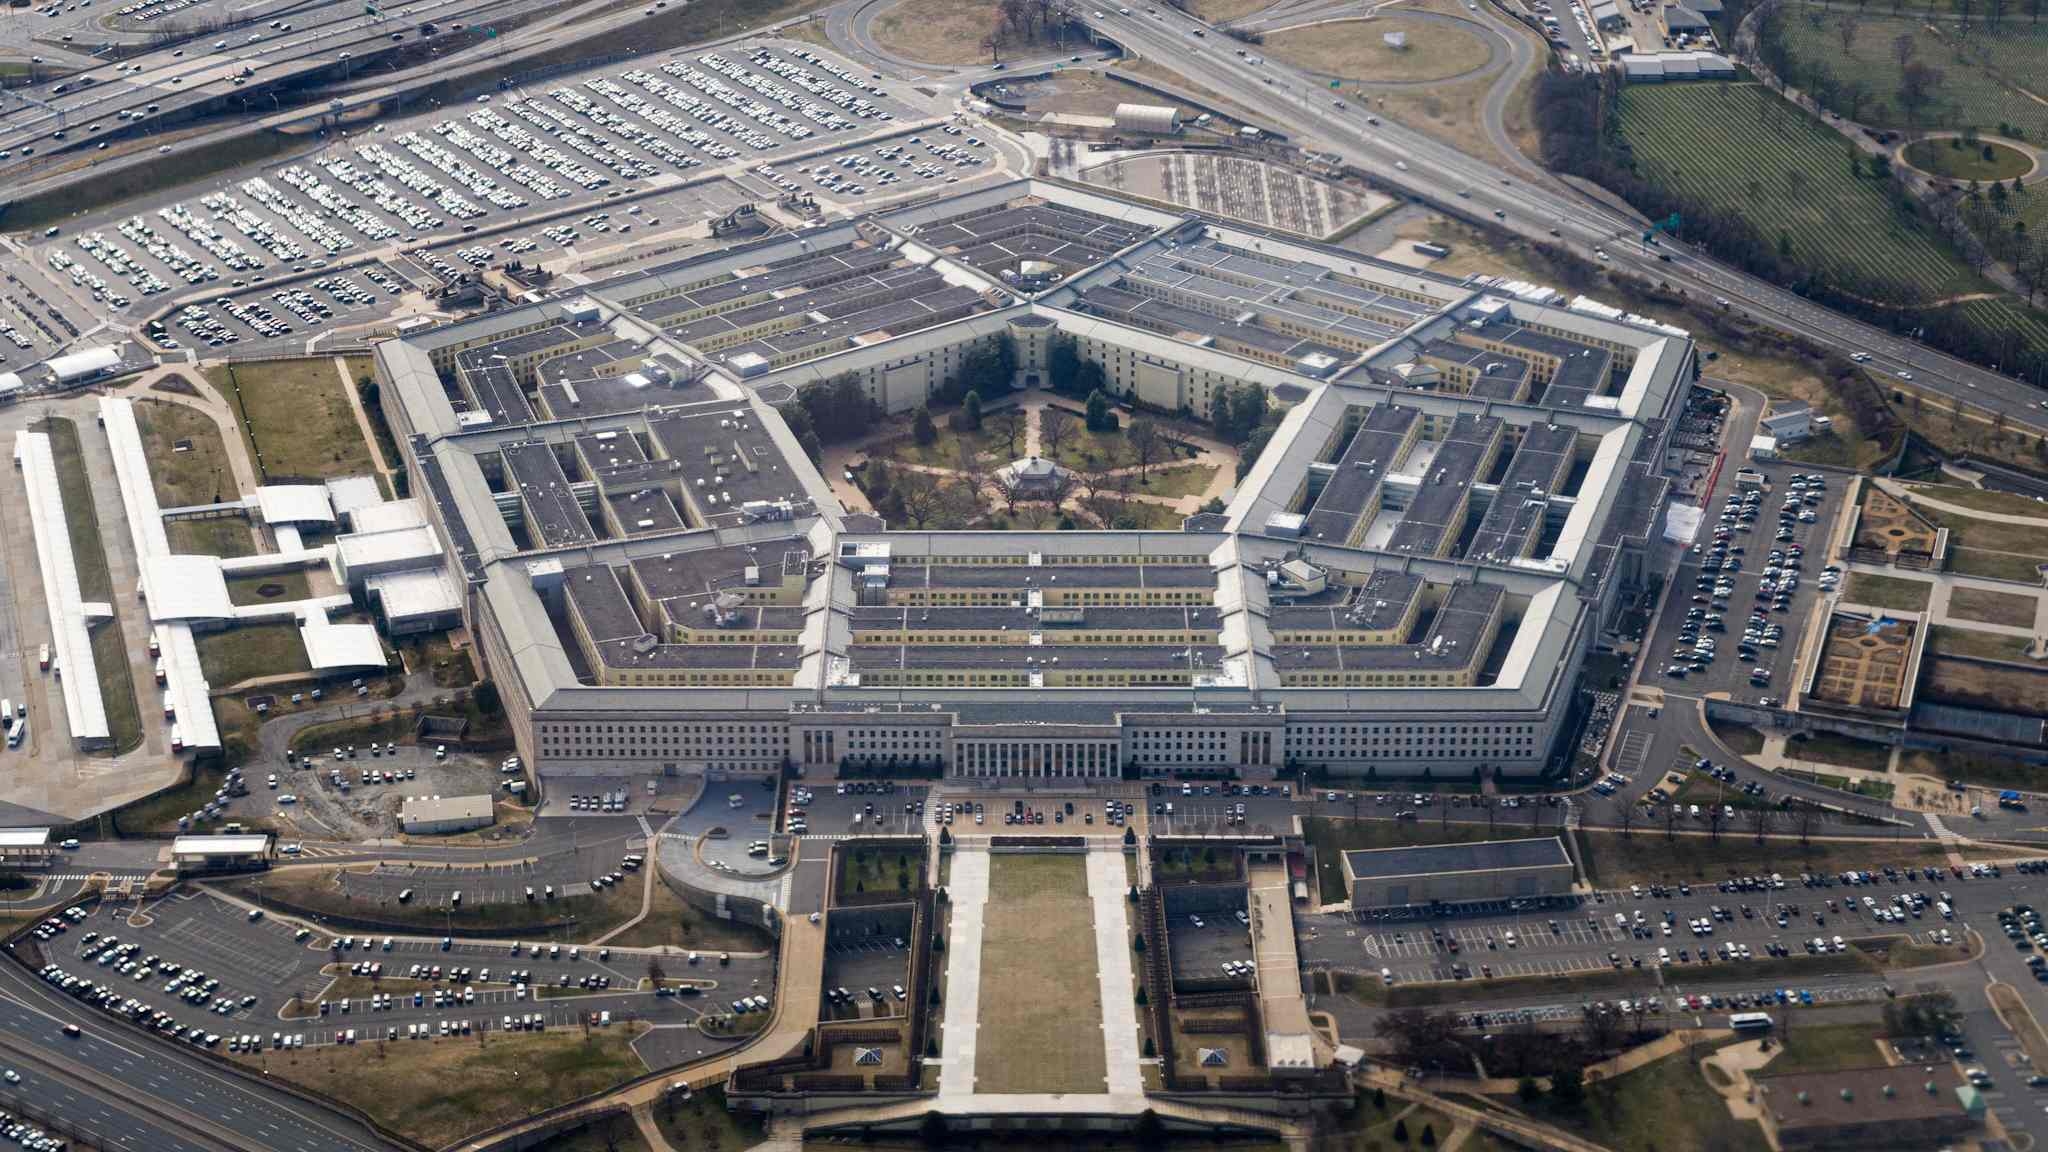 The Pentagon is seen from the air near Washington DC on 3 March 2022